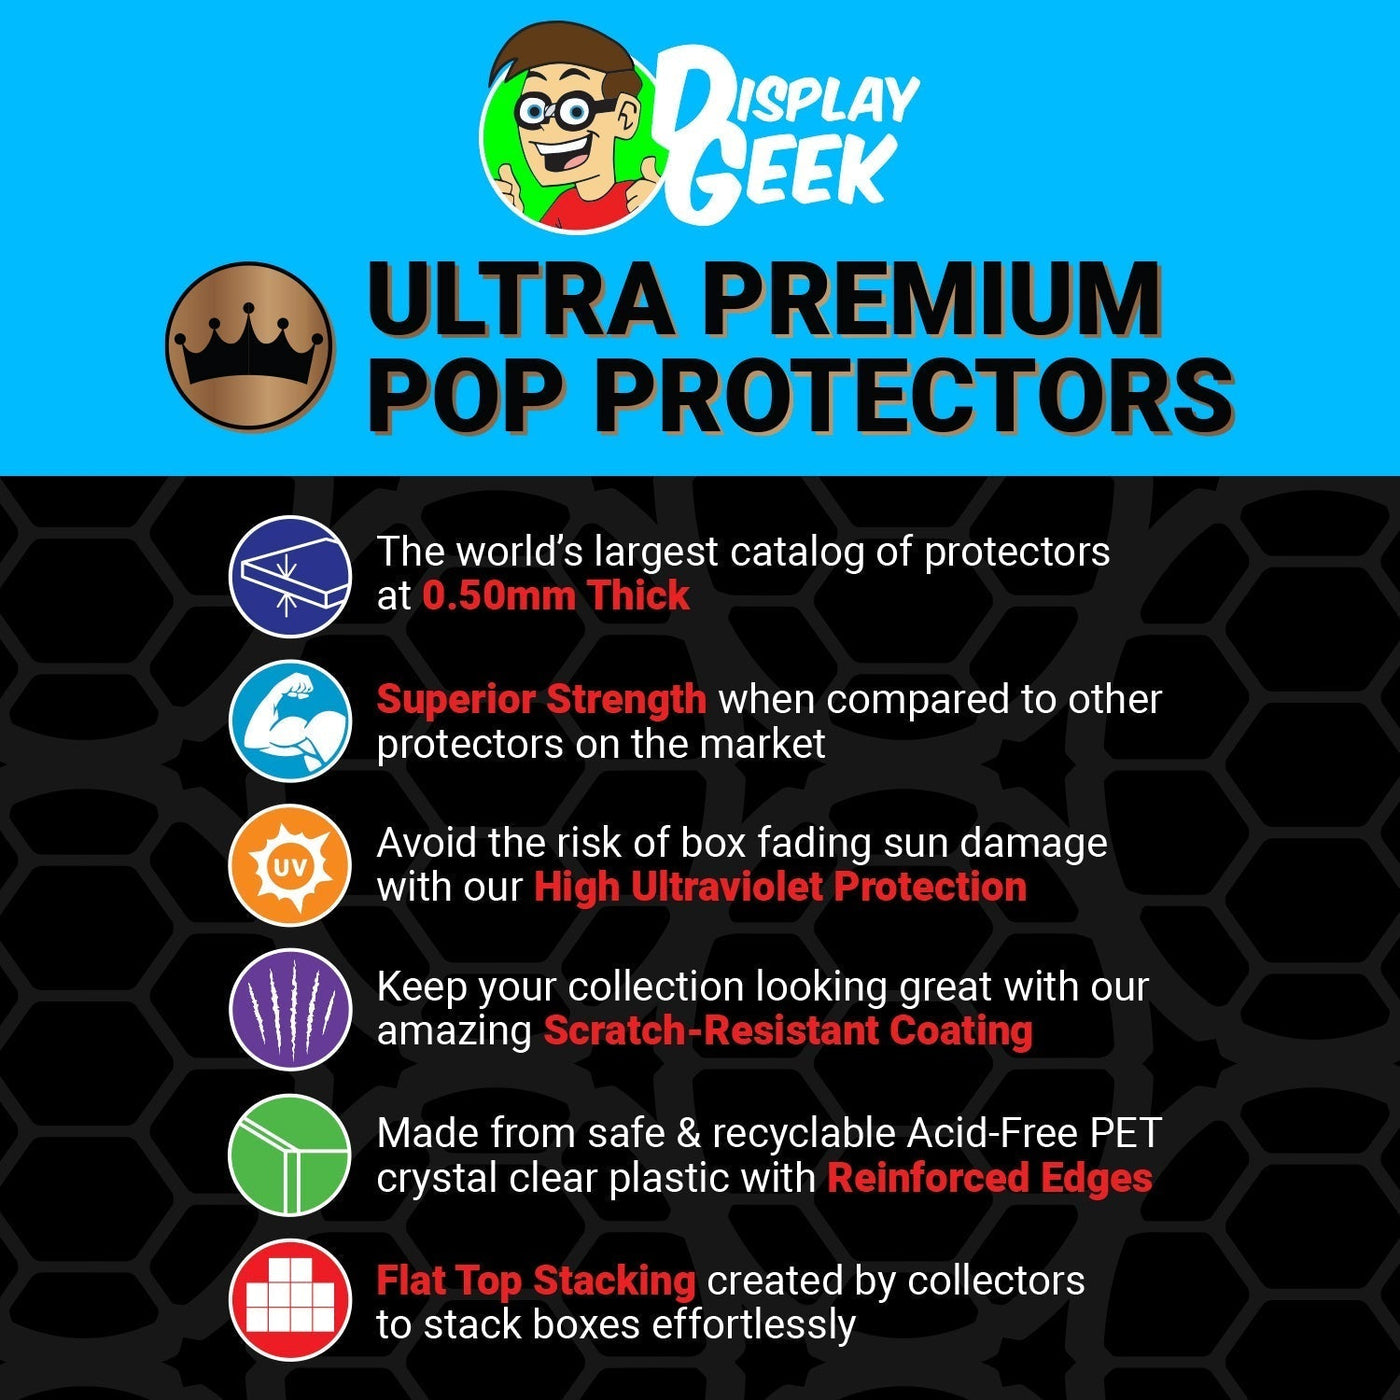 Pop Protector for 3 Pack Wonder Woman Gauntlets Chrome Funko Pop on The Protector Guide App by Display Geek